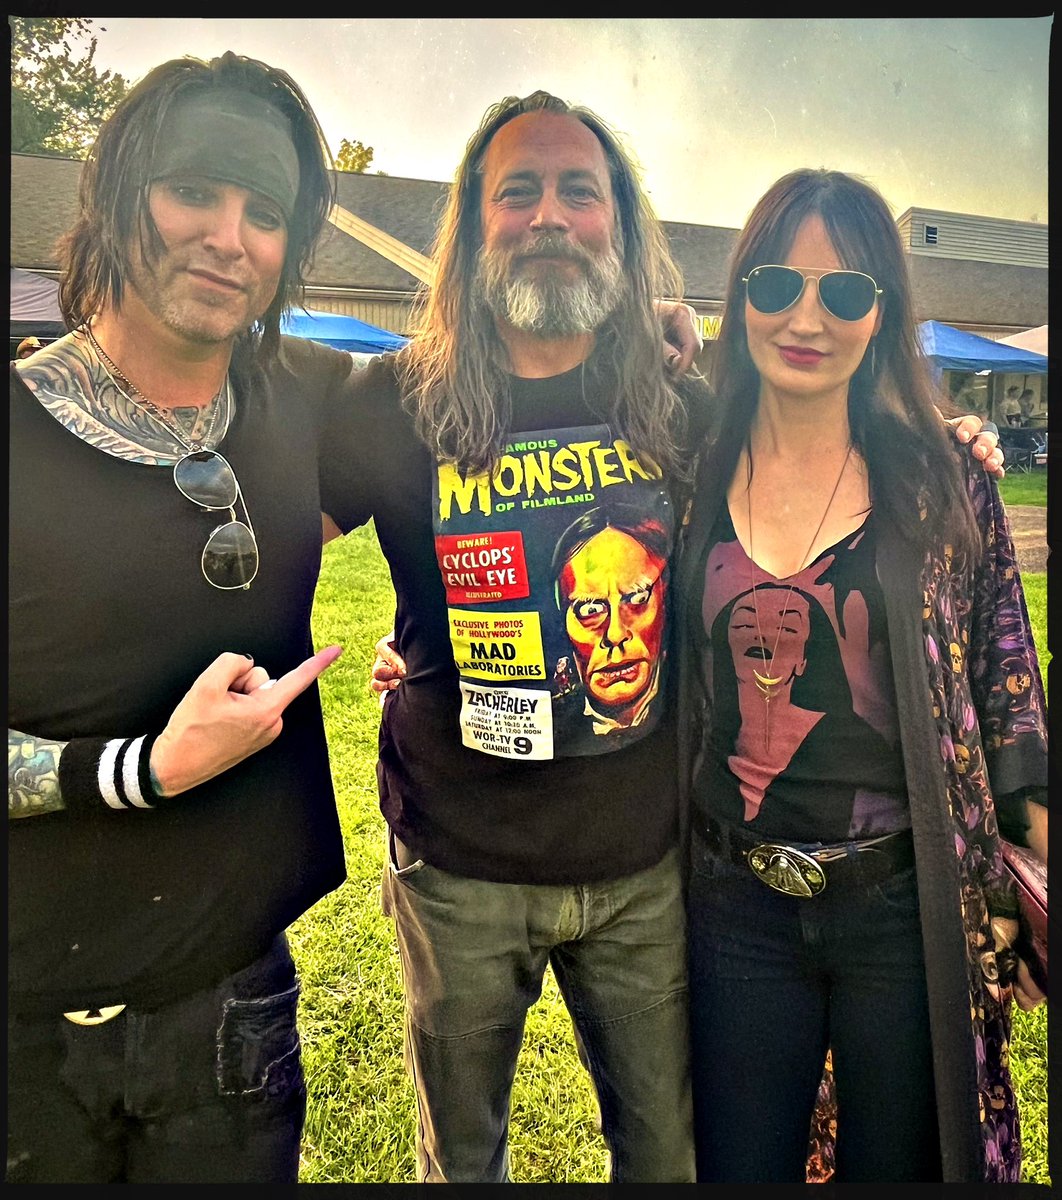 Got to talk in person with one of my favorite people on this app, @acevonjohnson !!! Put on a great show in our podunk (and I mean podunk) town. We had a blast! Come for a visit soon, Ace!!! #MutantFam #FasterPussycat #LAGuns #AdoptDontShop